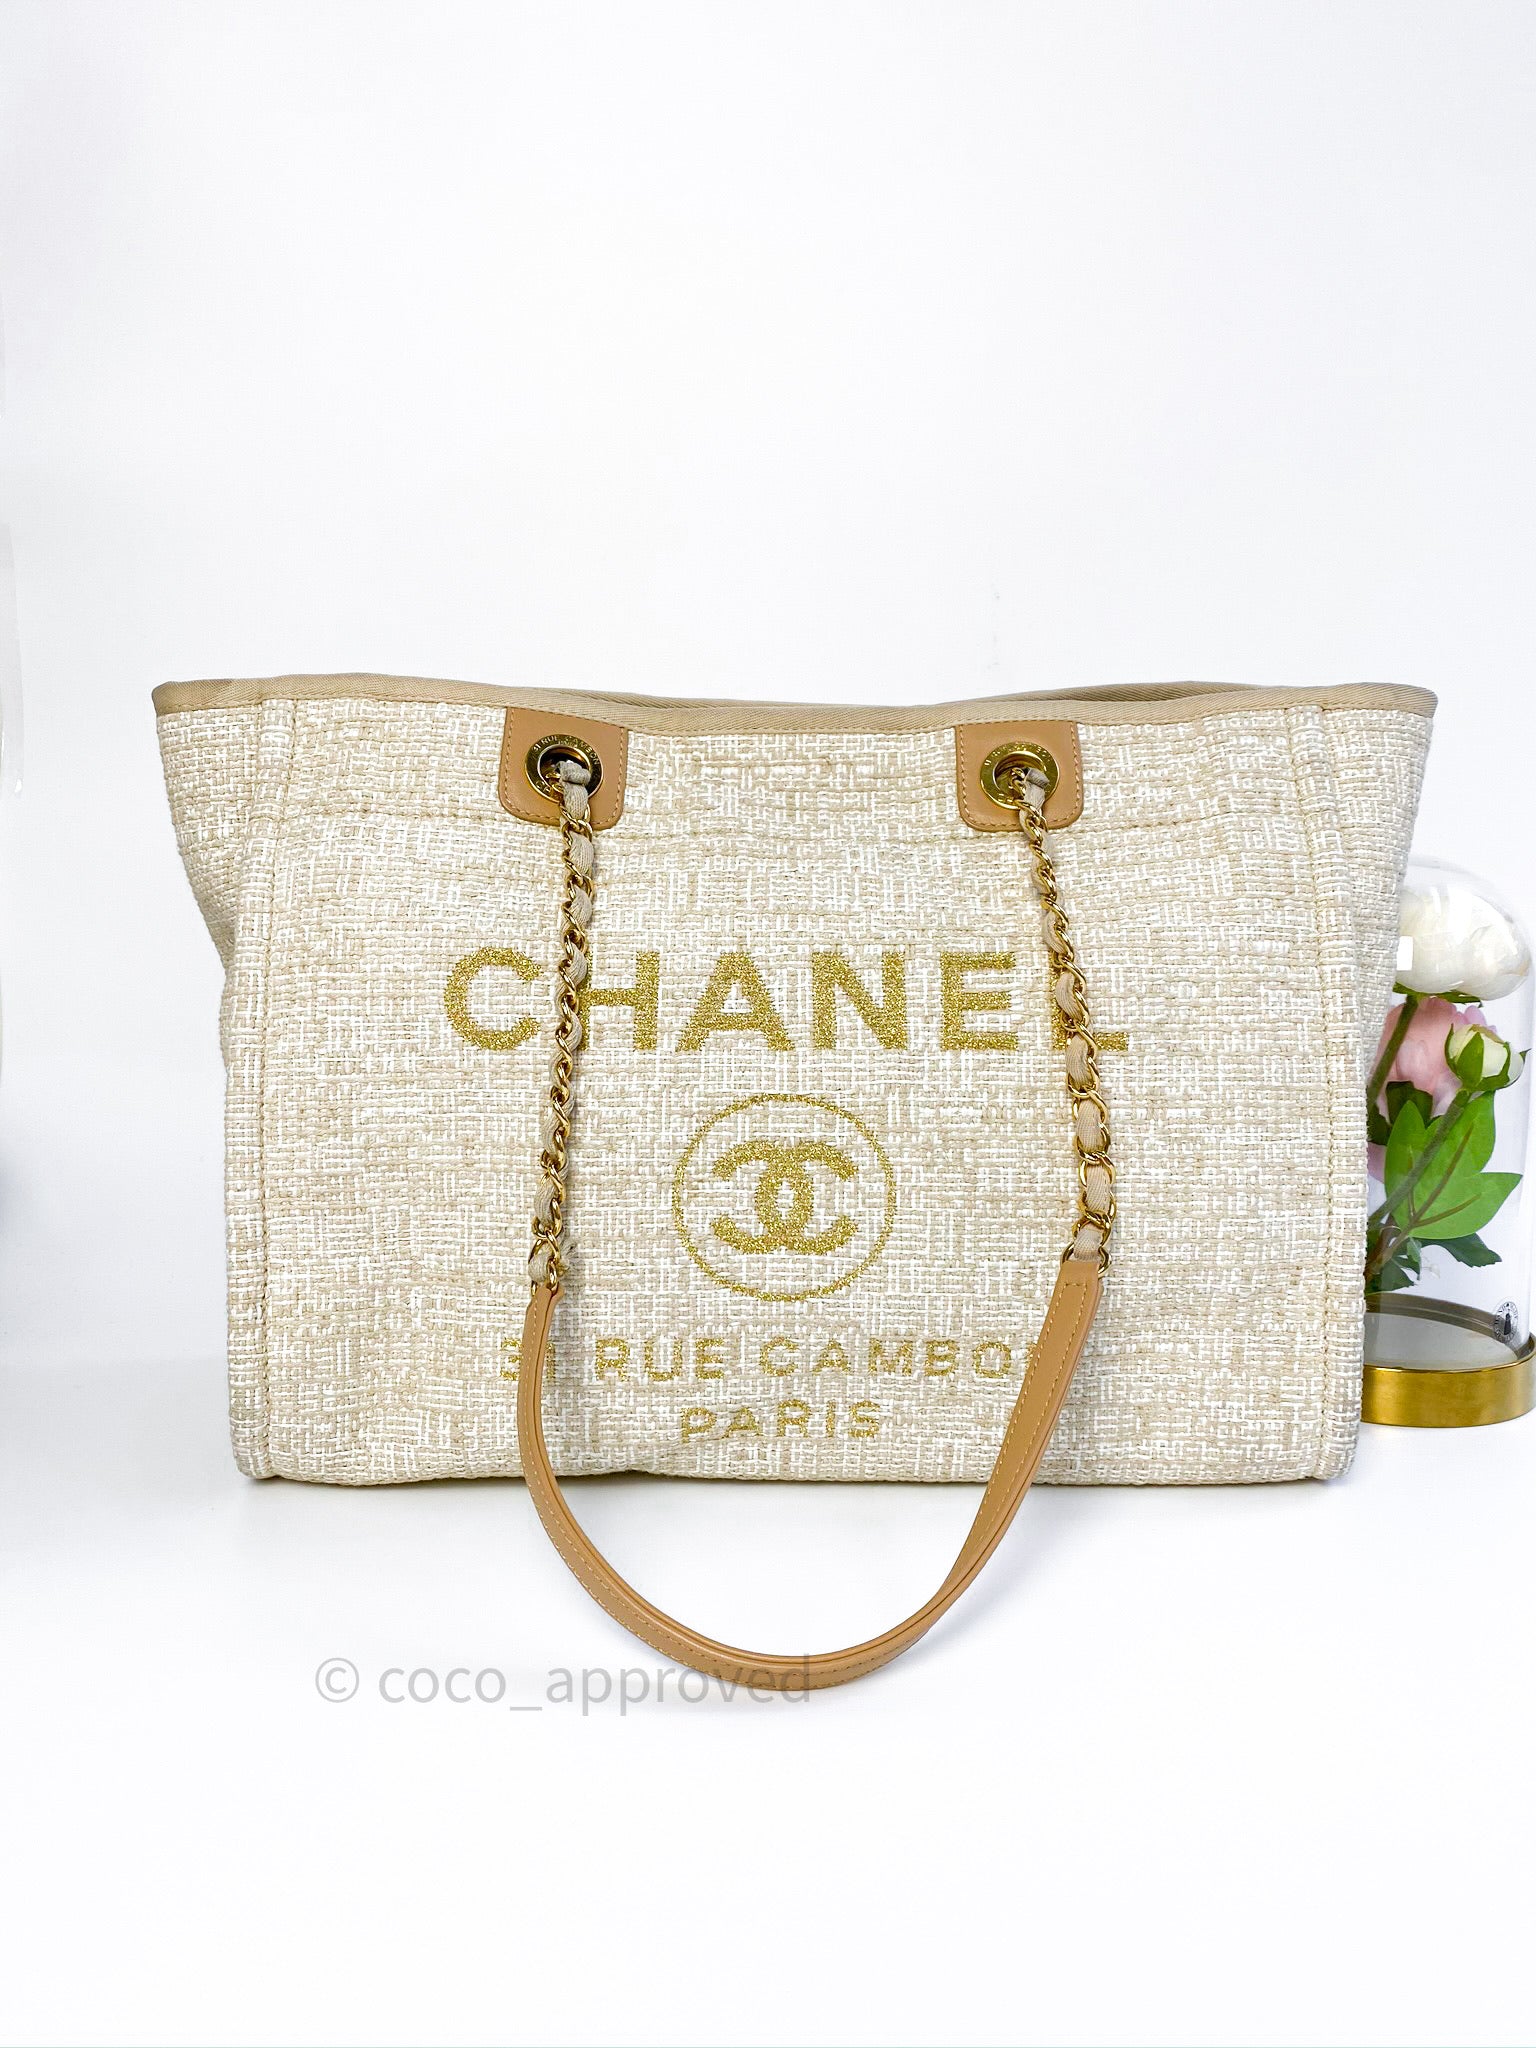 pink chanel deauville tote large